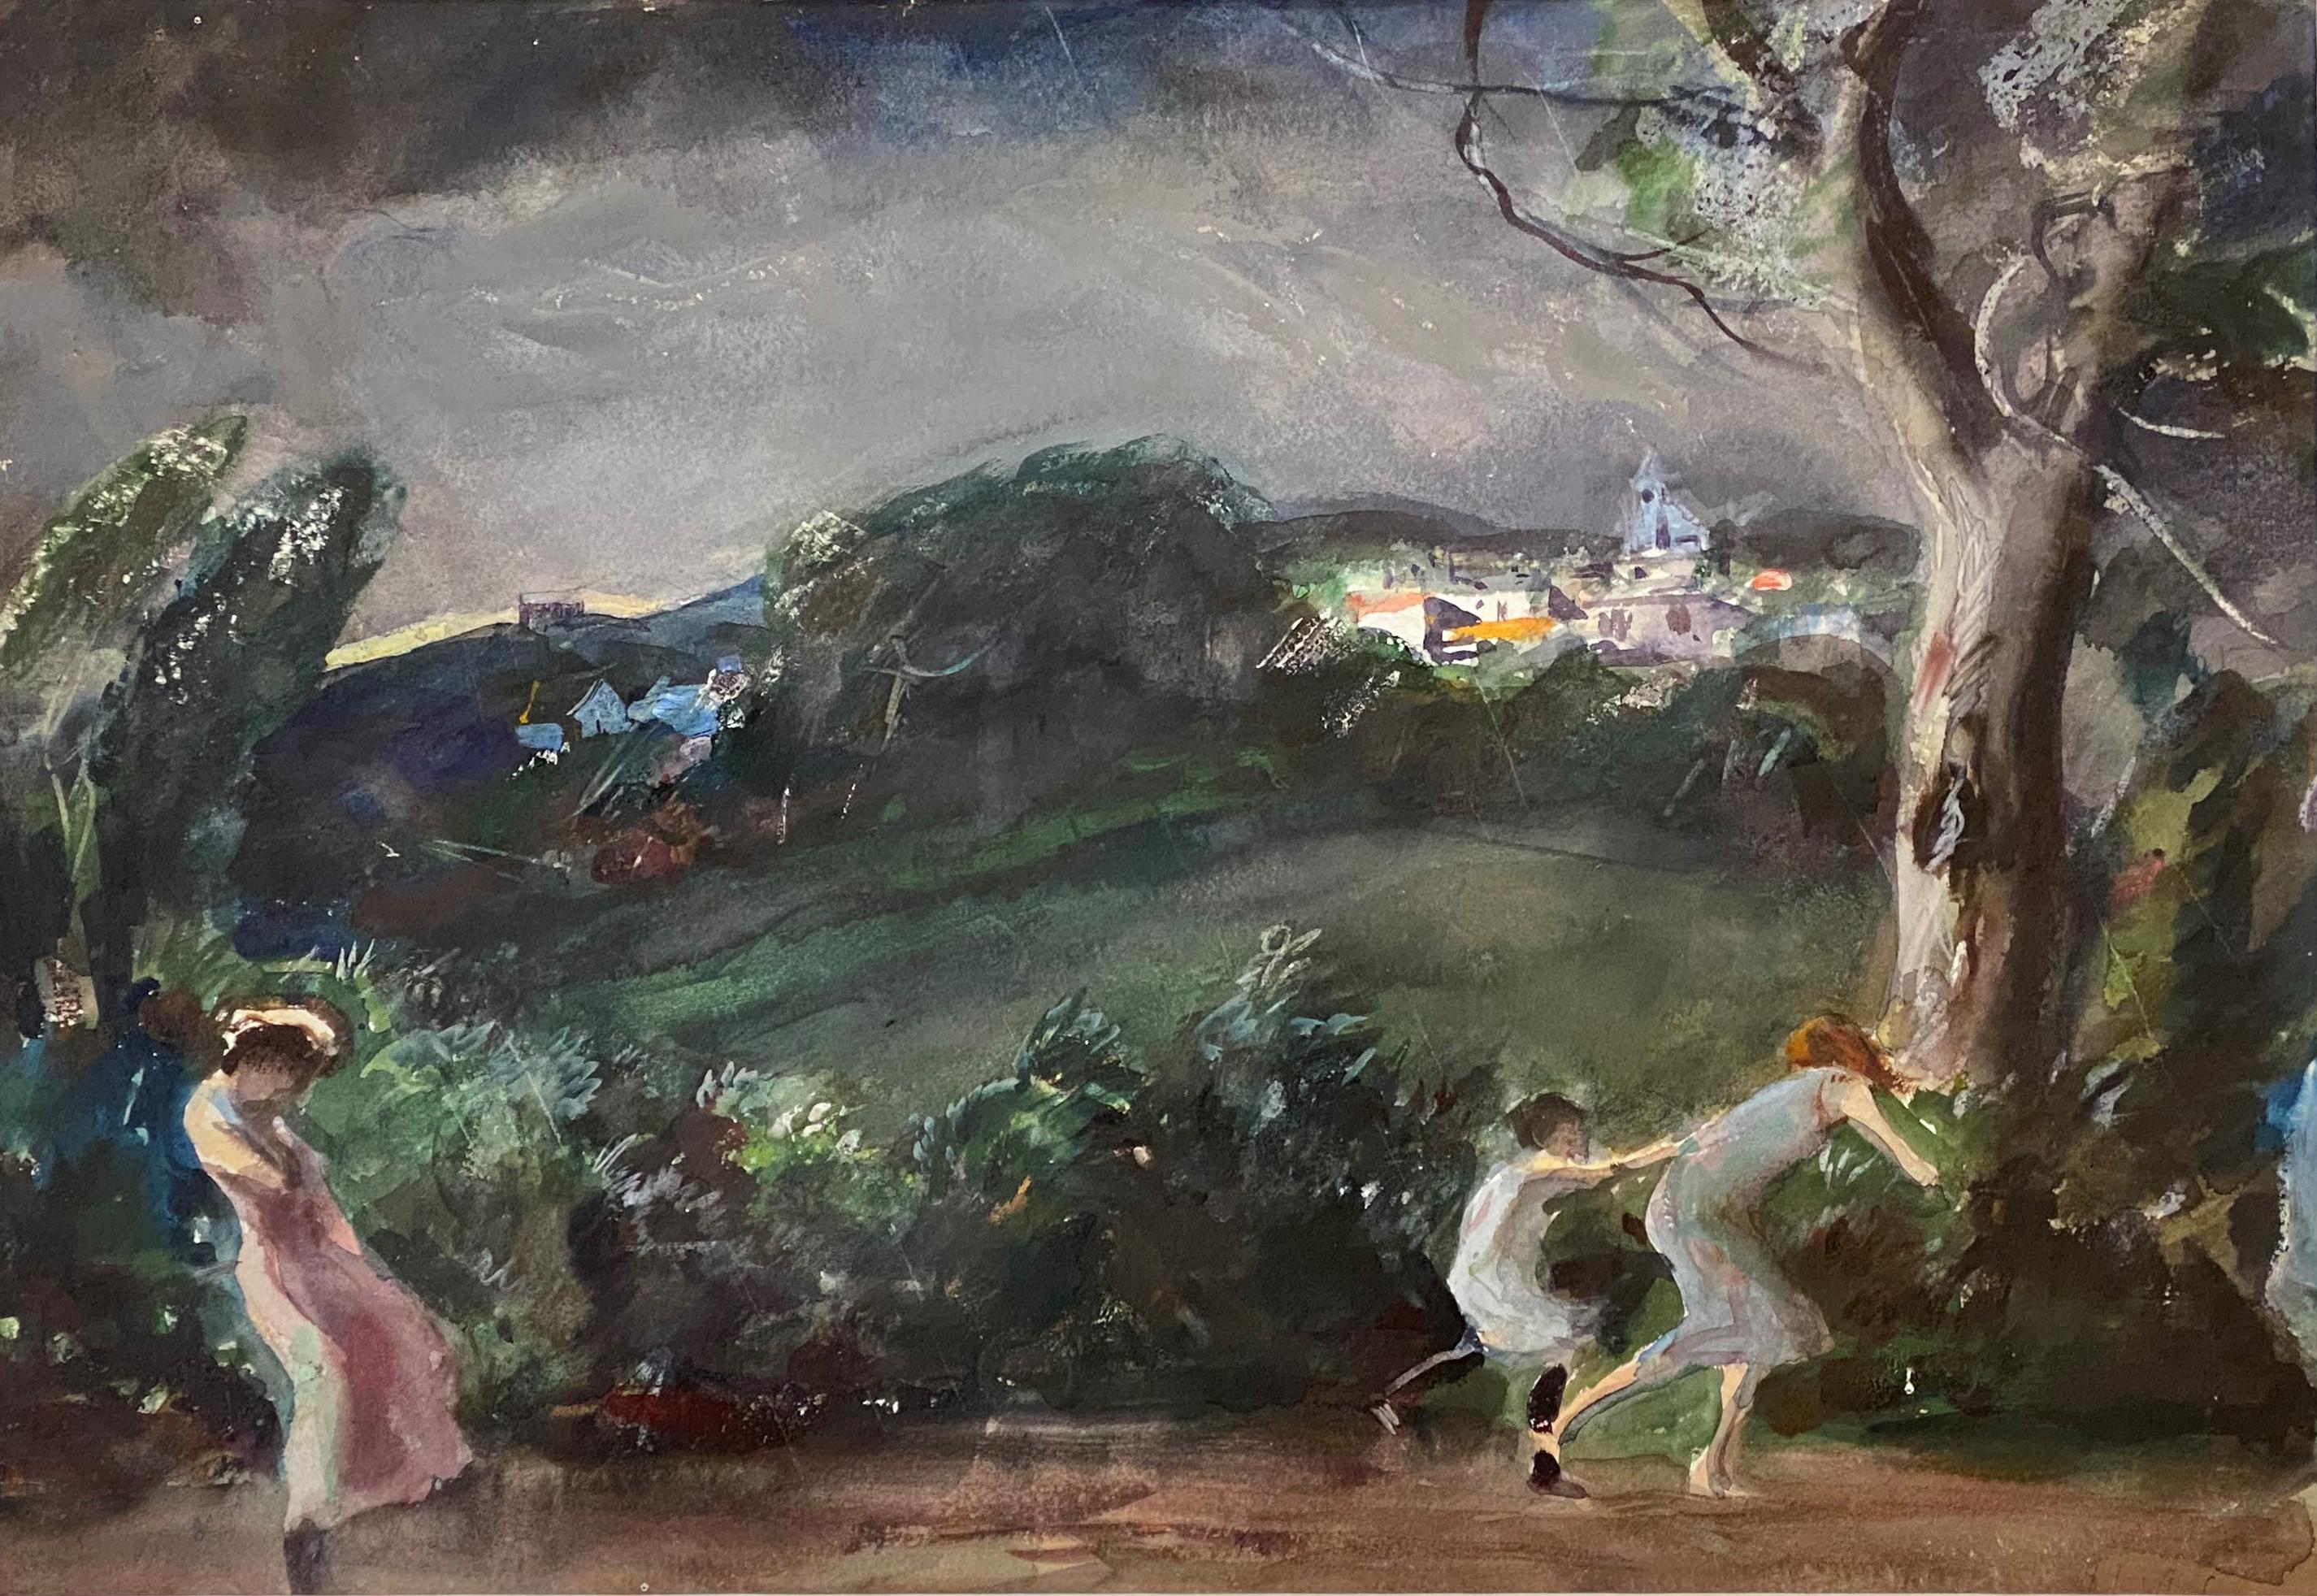 Summer Storm - Painting by John Whorf